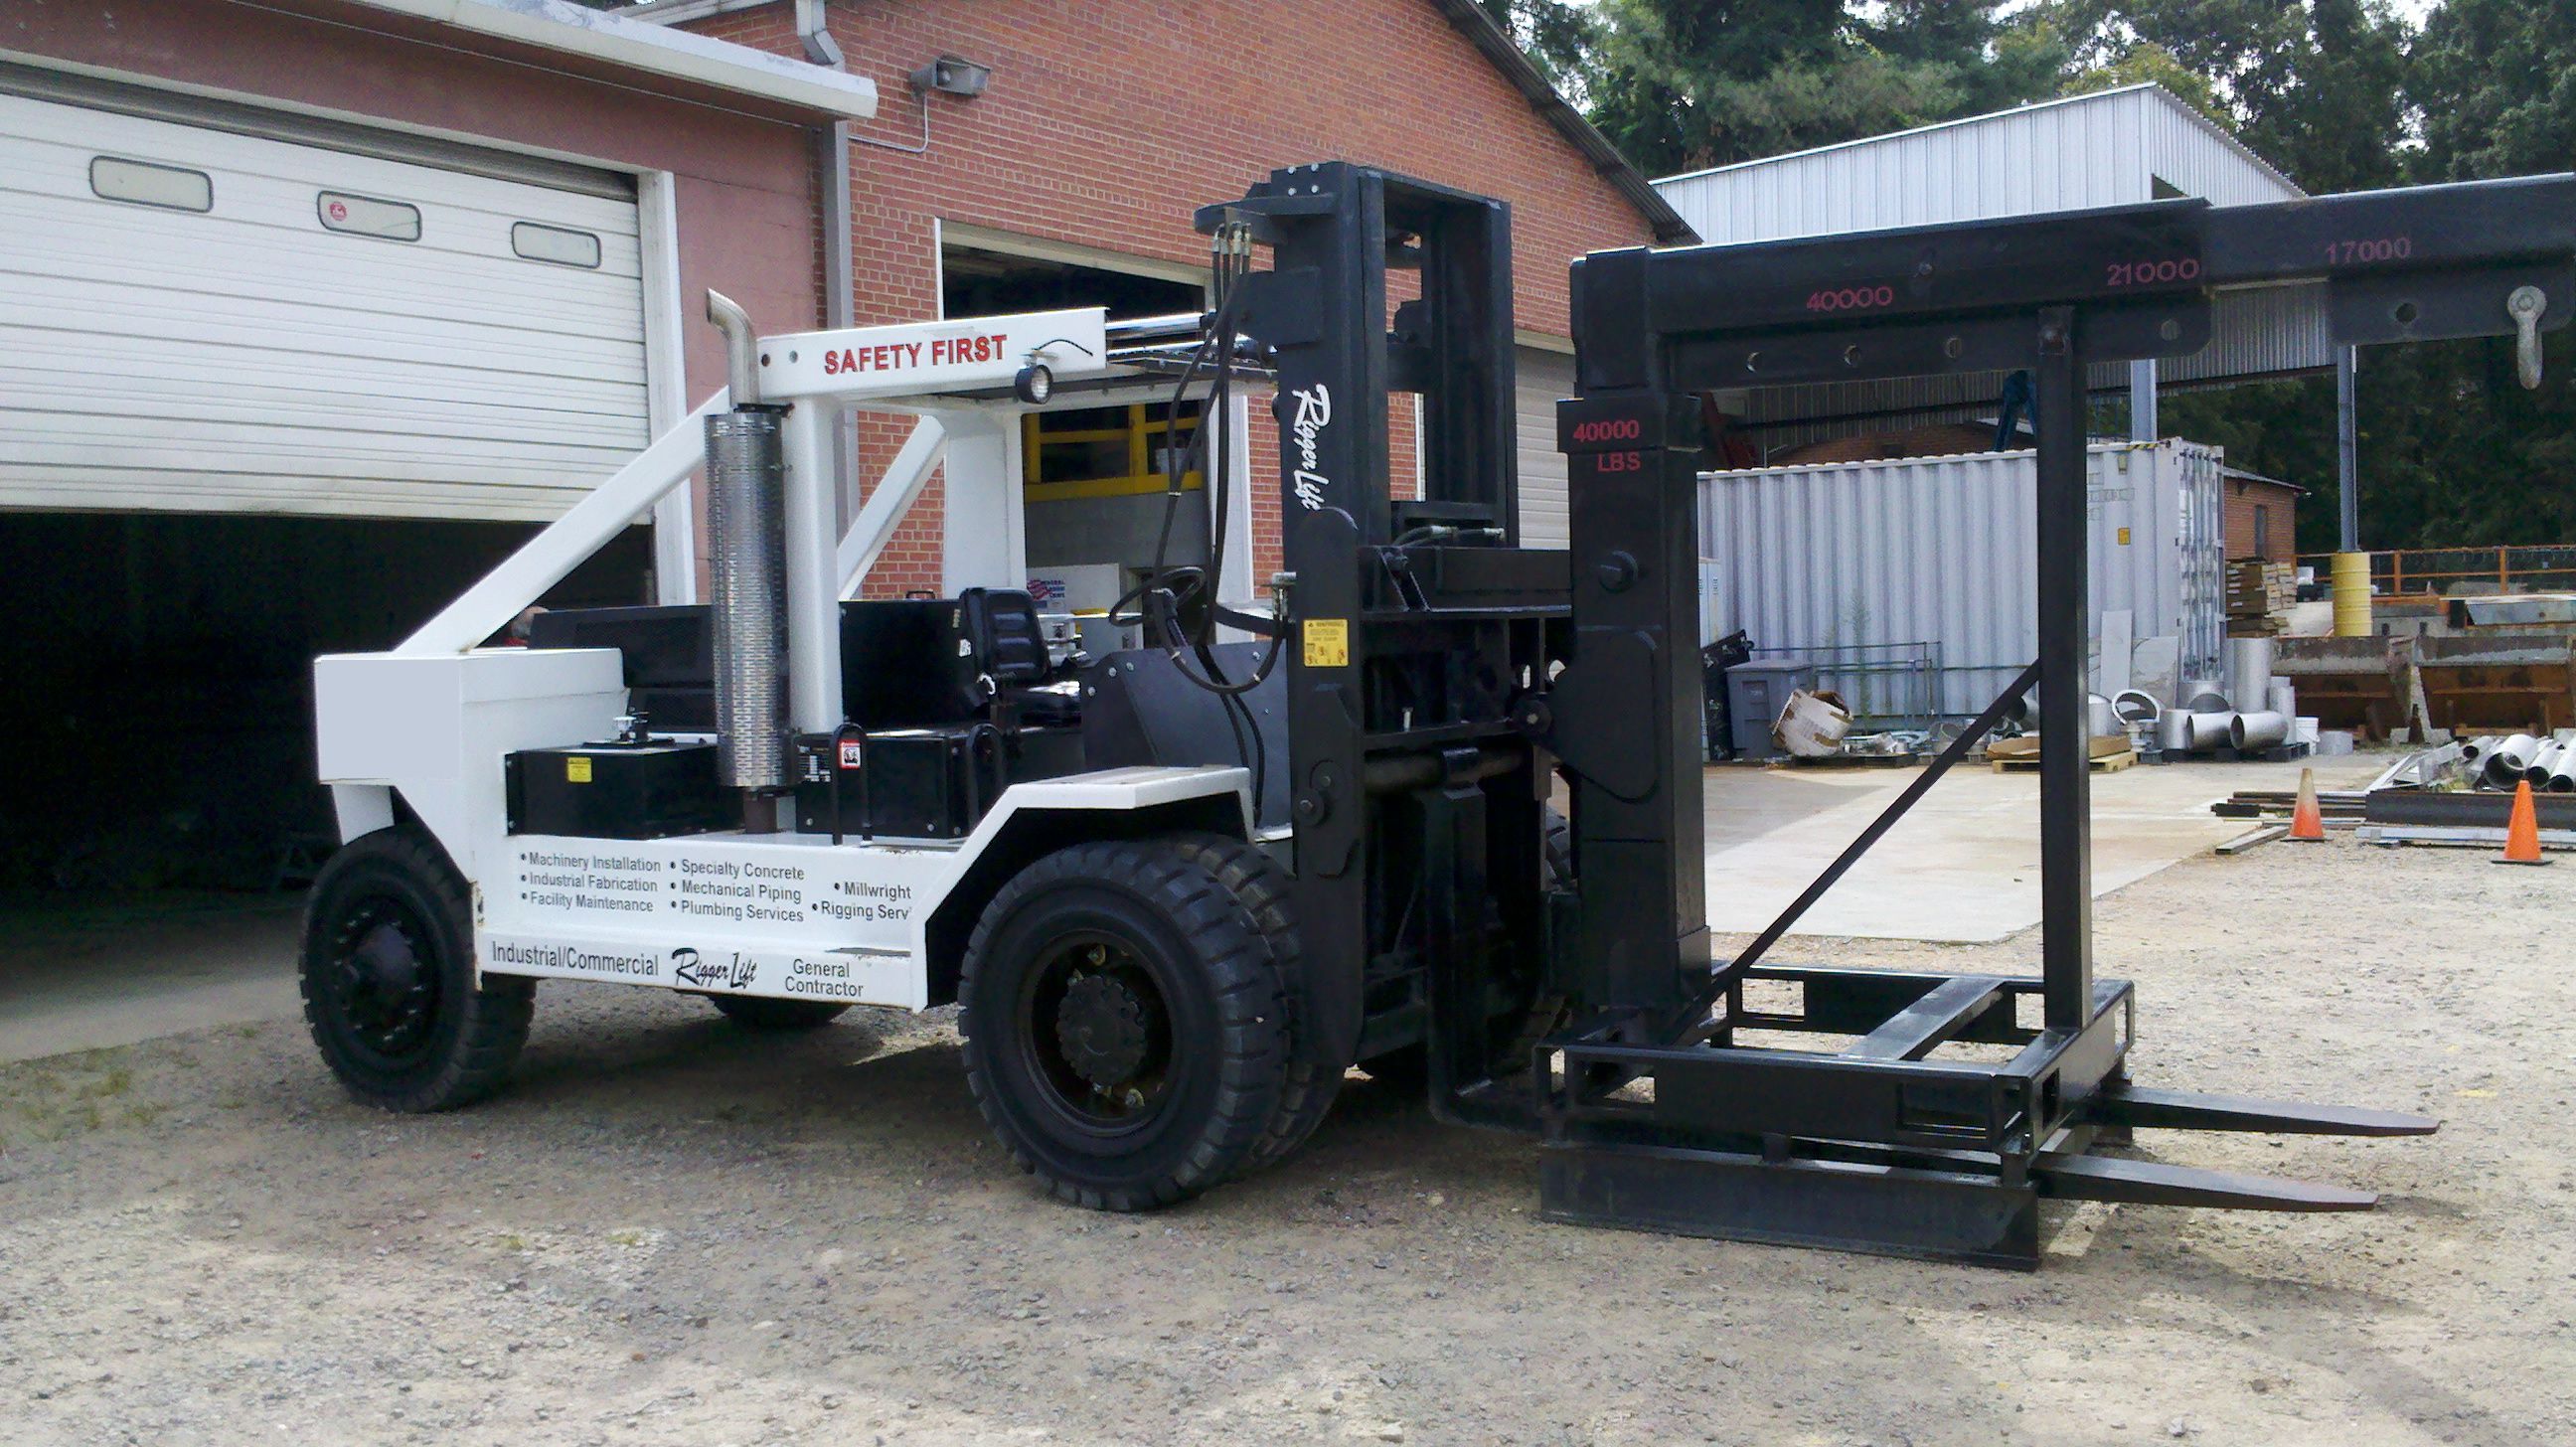 40 000lbs Riggers Lift Forklift For Sale Call 616 200 4308affordable Machinery